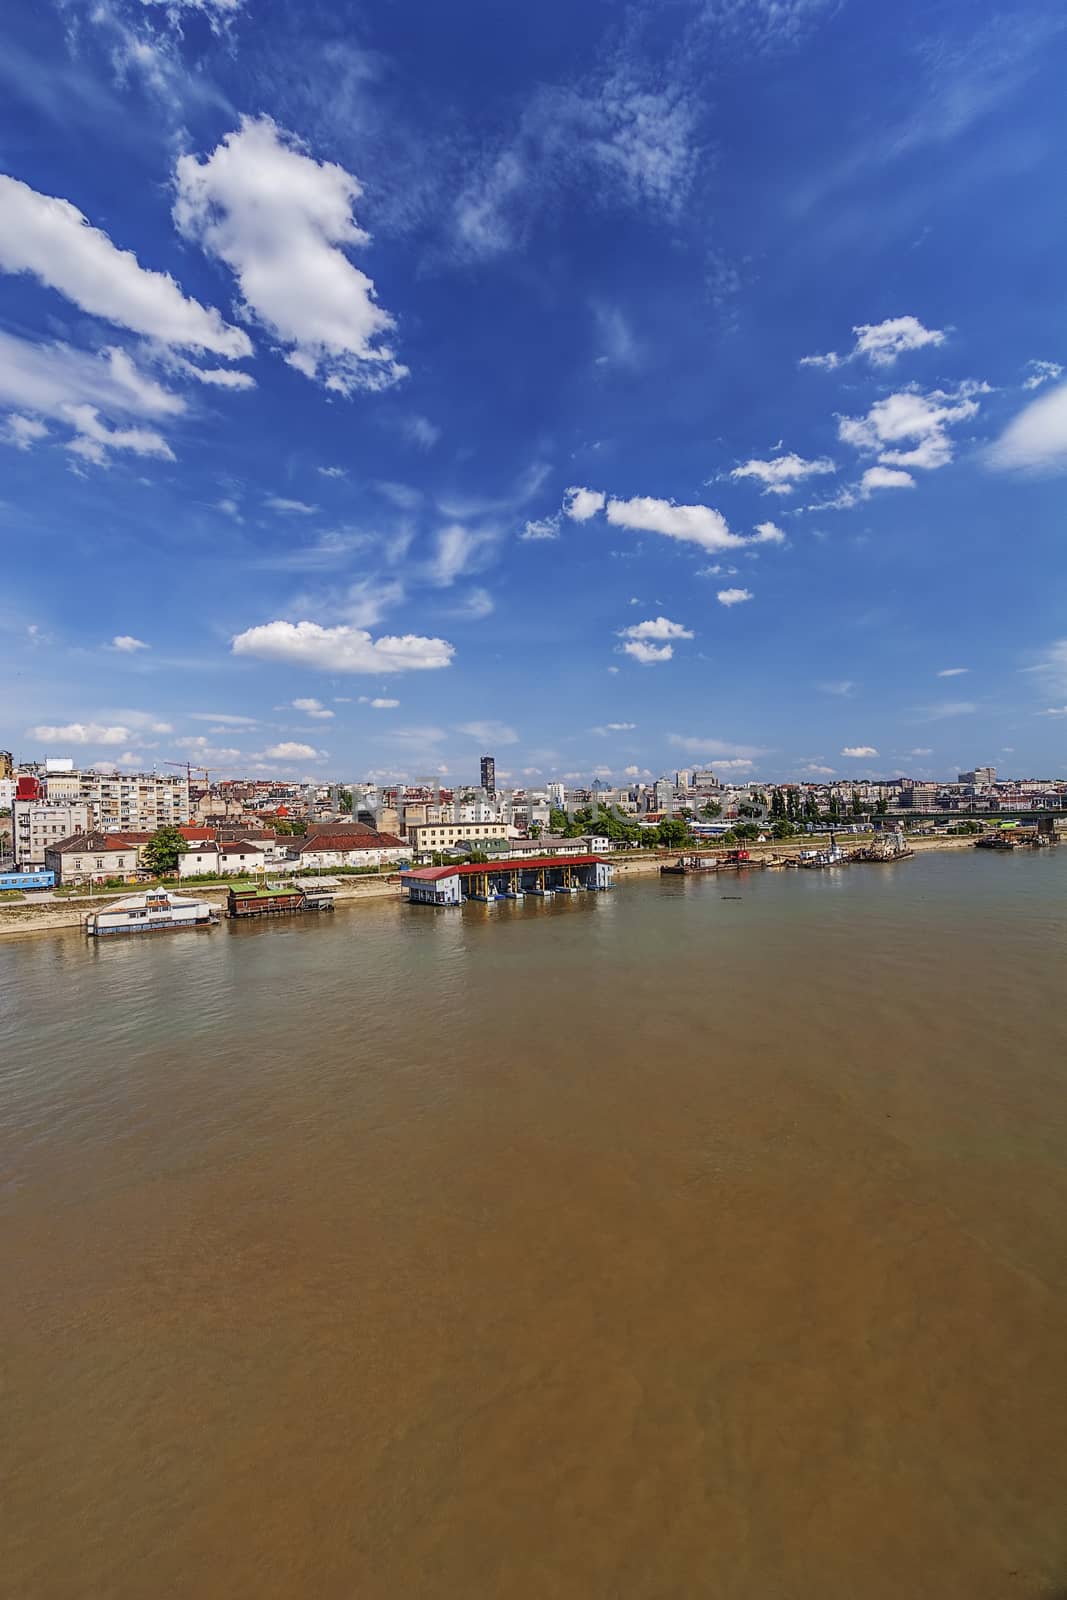 Panorama view on Belgrade old part of town and bridge, on confluence of two rivers